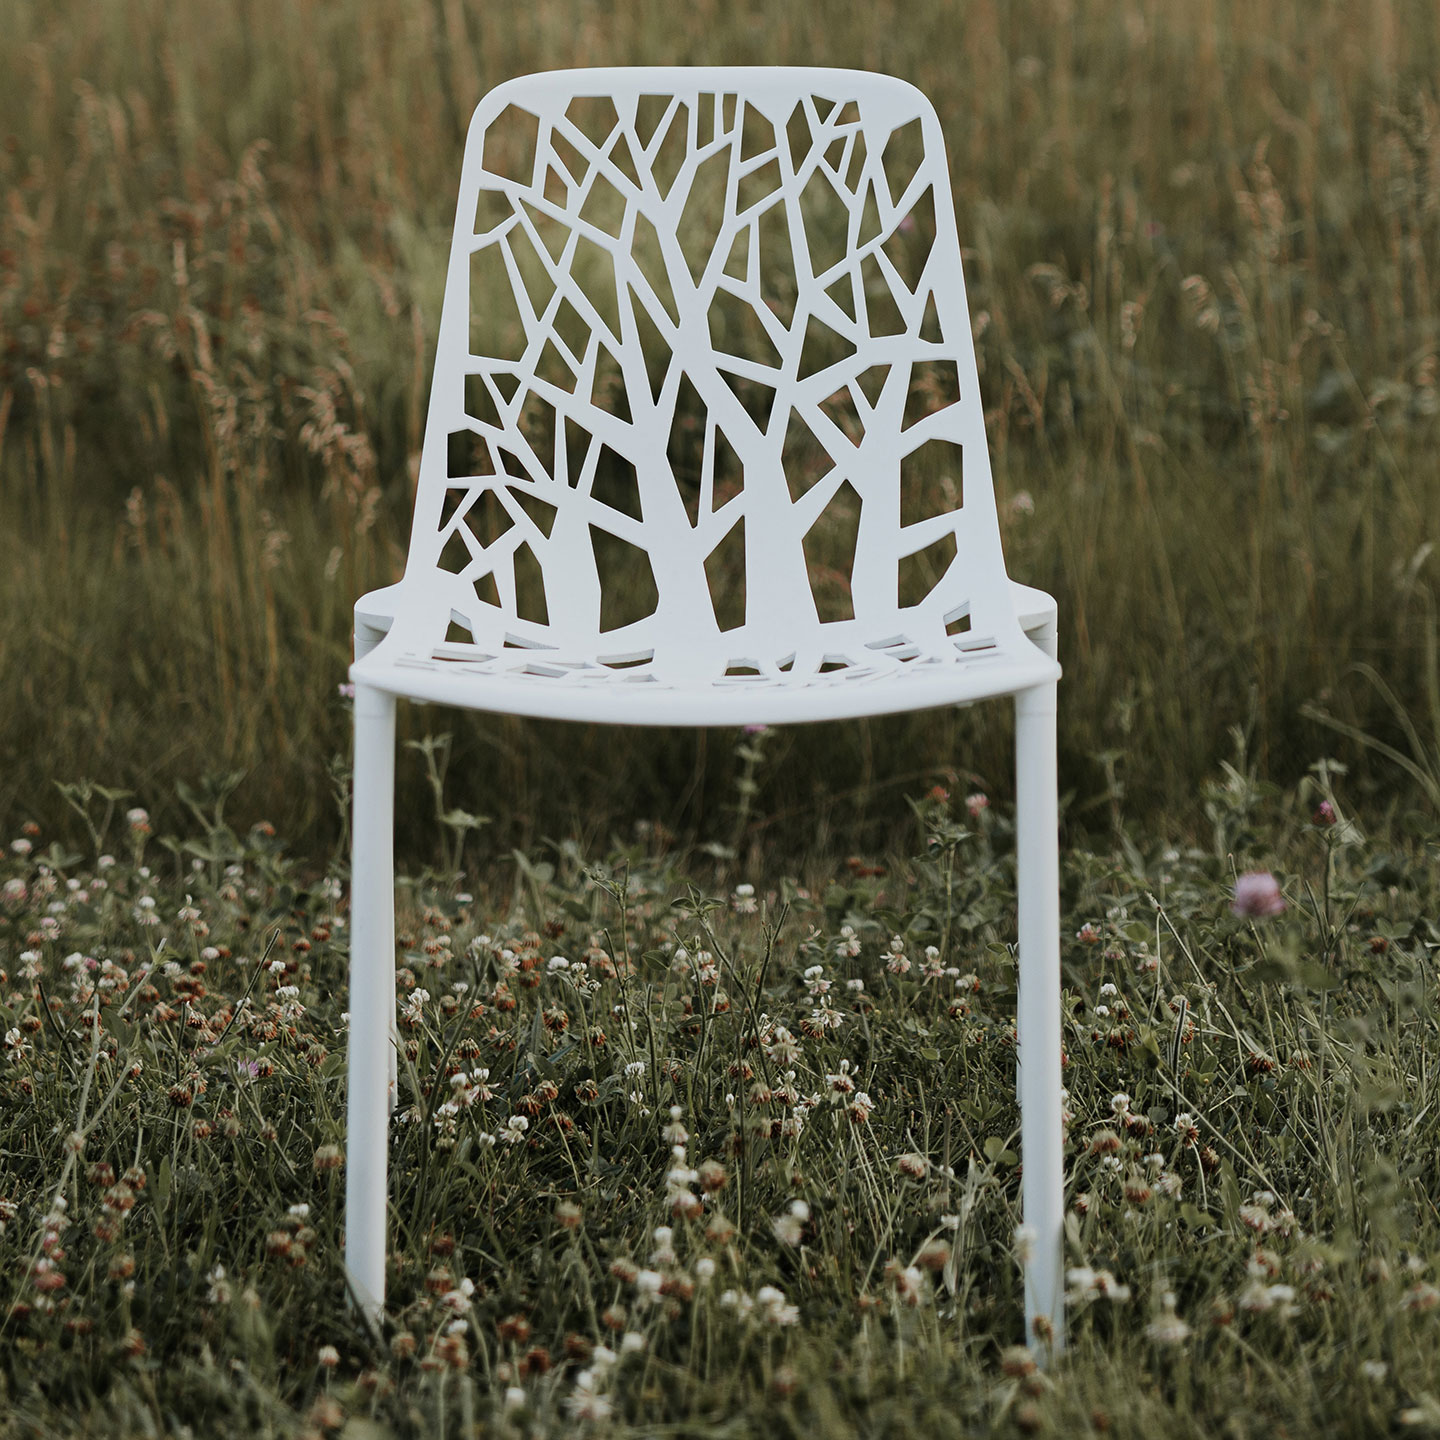 Haworth Forest chair in white in a field amidst nature